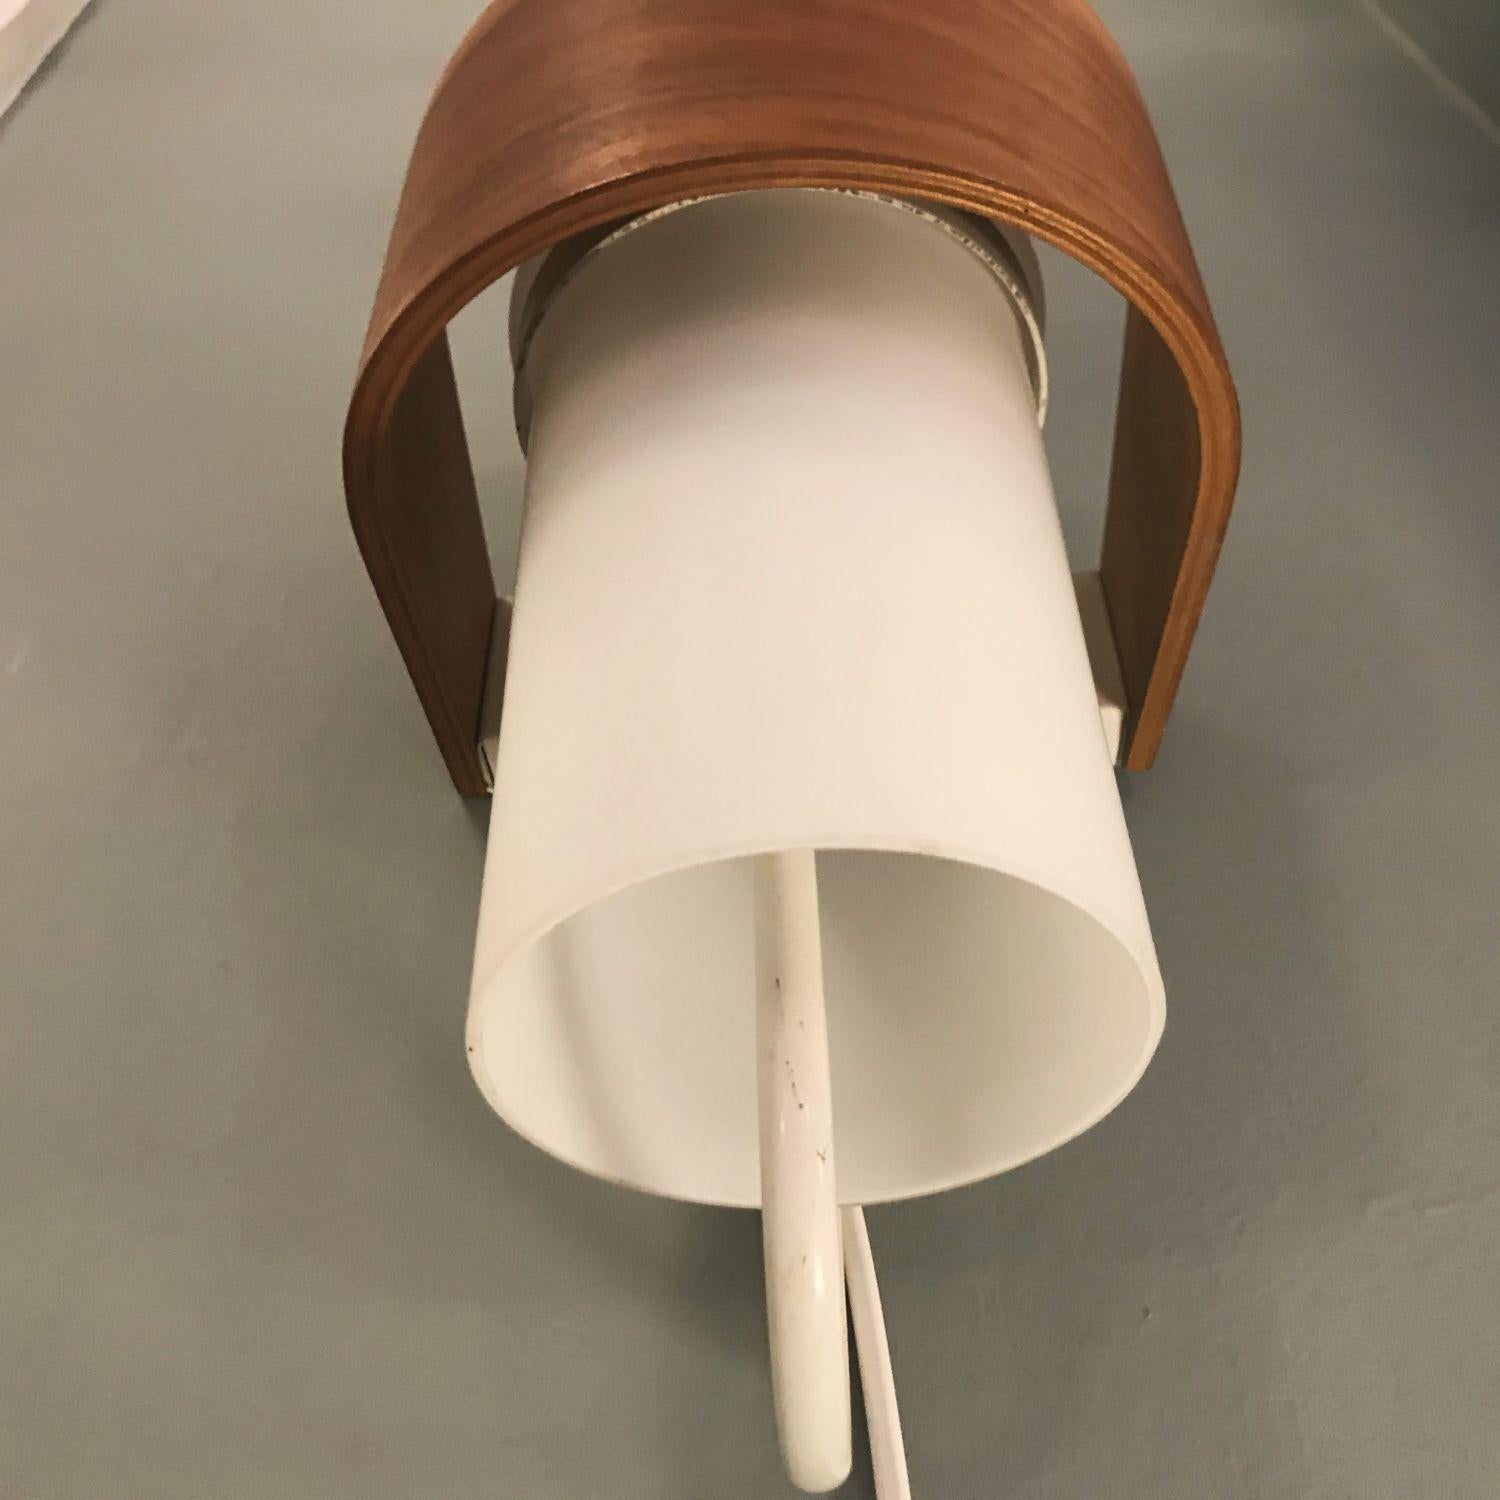 The combination of teak veneer and milk white opaline glass is allways a winner combination. And so is this wall light from Dutch designer Louis Kalff (manufactured by Phillips), designred in the early 1960's and named NX40!

Louis Kalff has